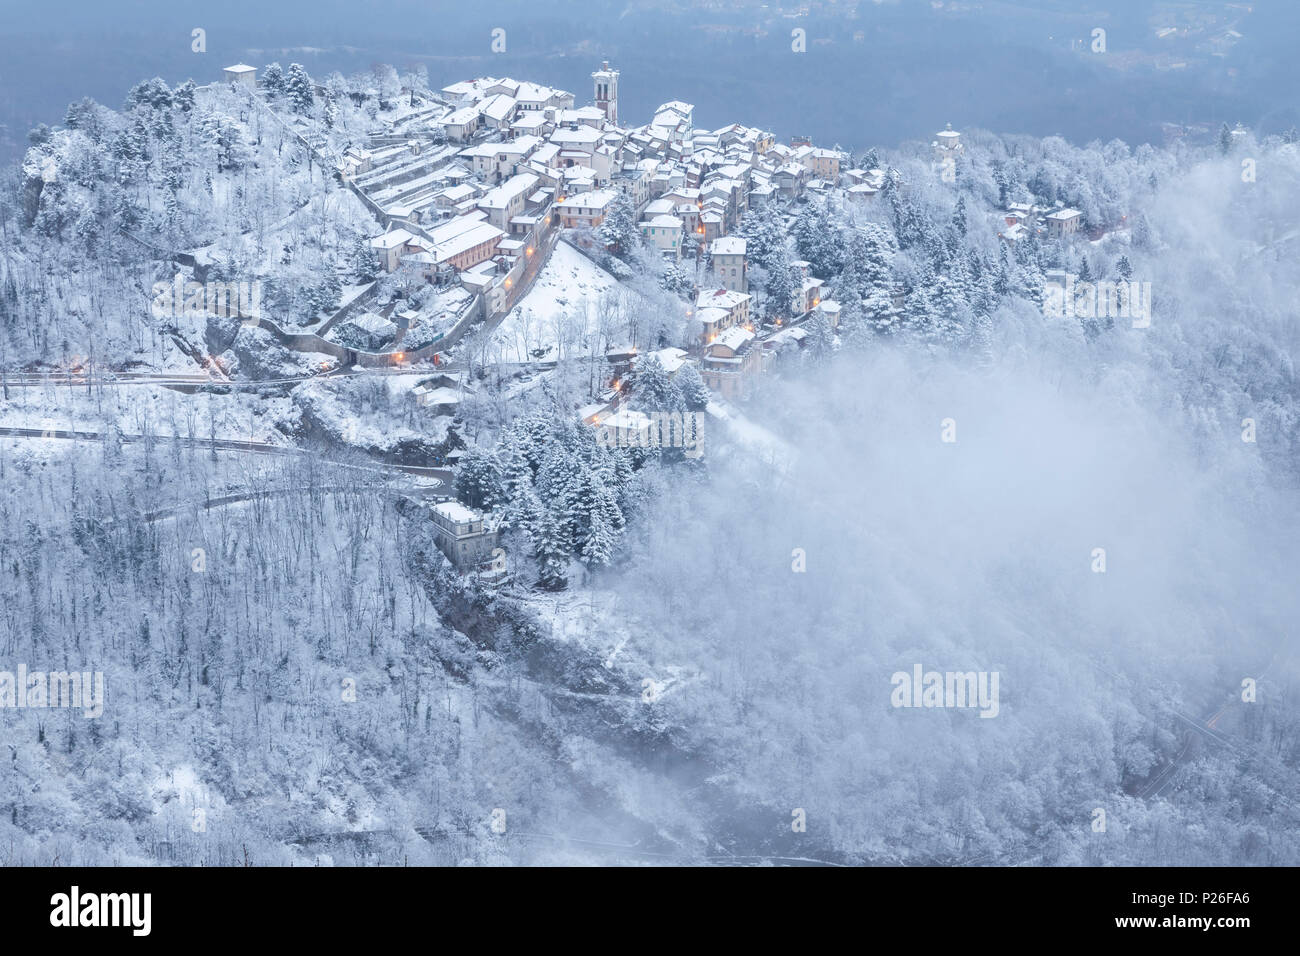 Evening view of the town of Santa Maria del Monte after a snowfall in winter from the Campo dei Fiori. Campo dei Fiori, Varese, Parco Campo dei Fiori, Lombardy, Italy. Stock Photo